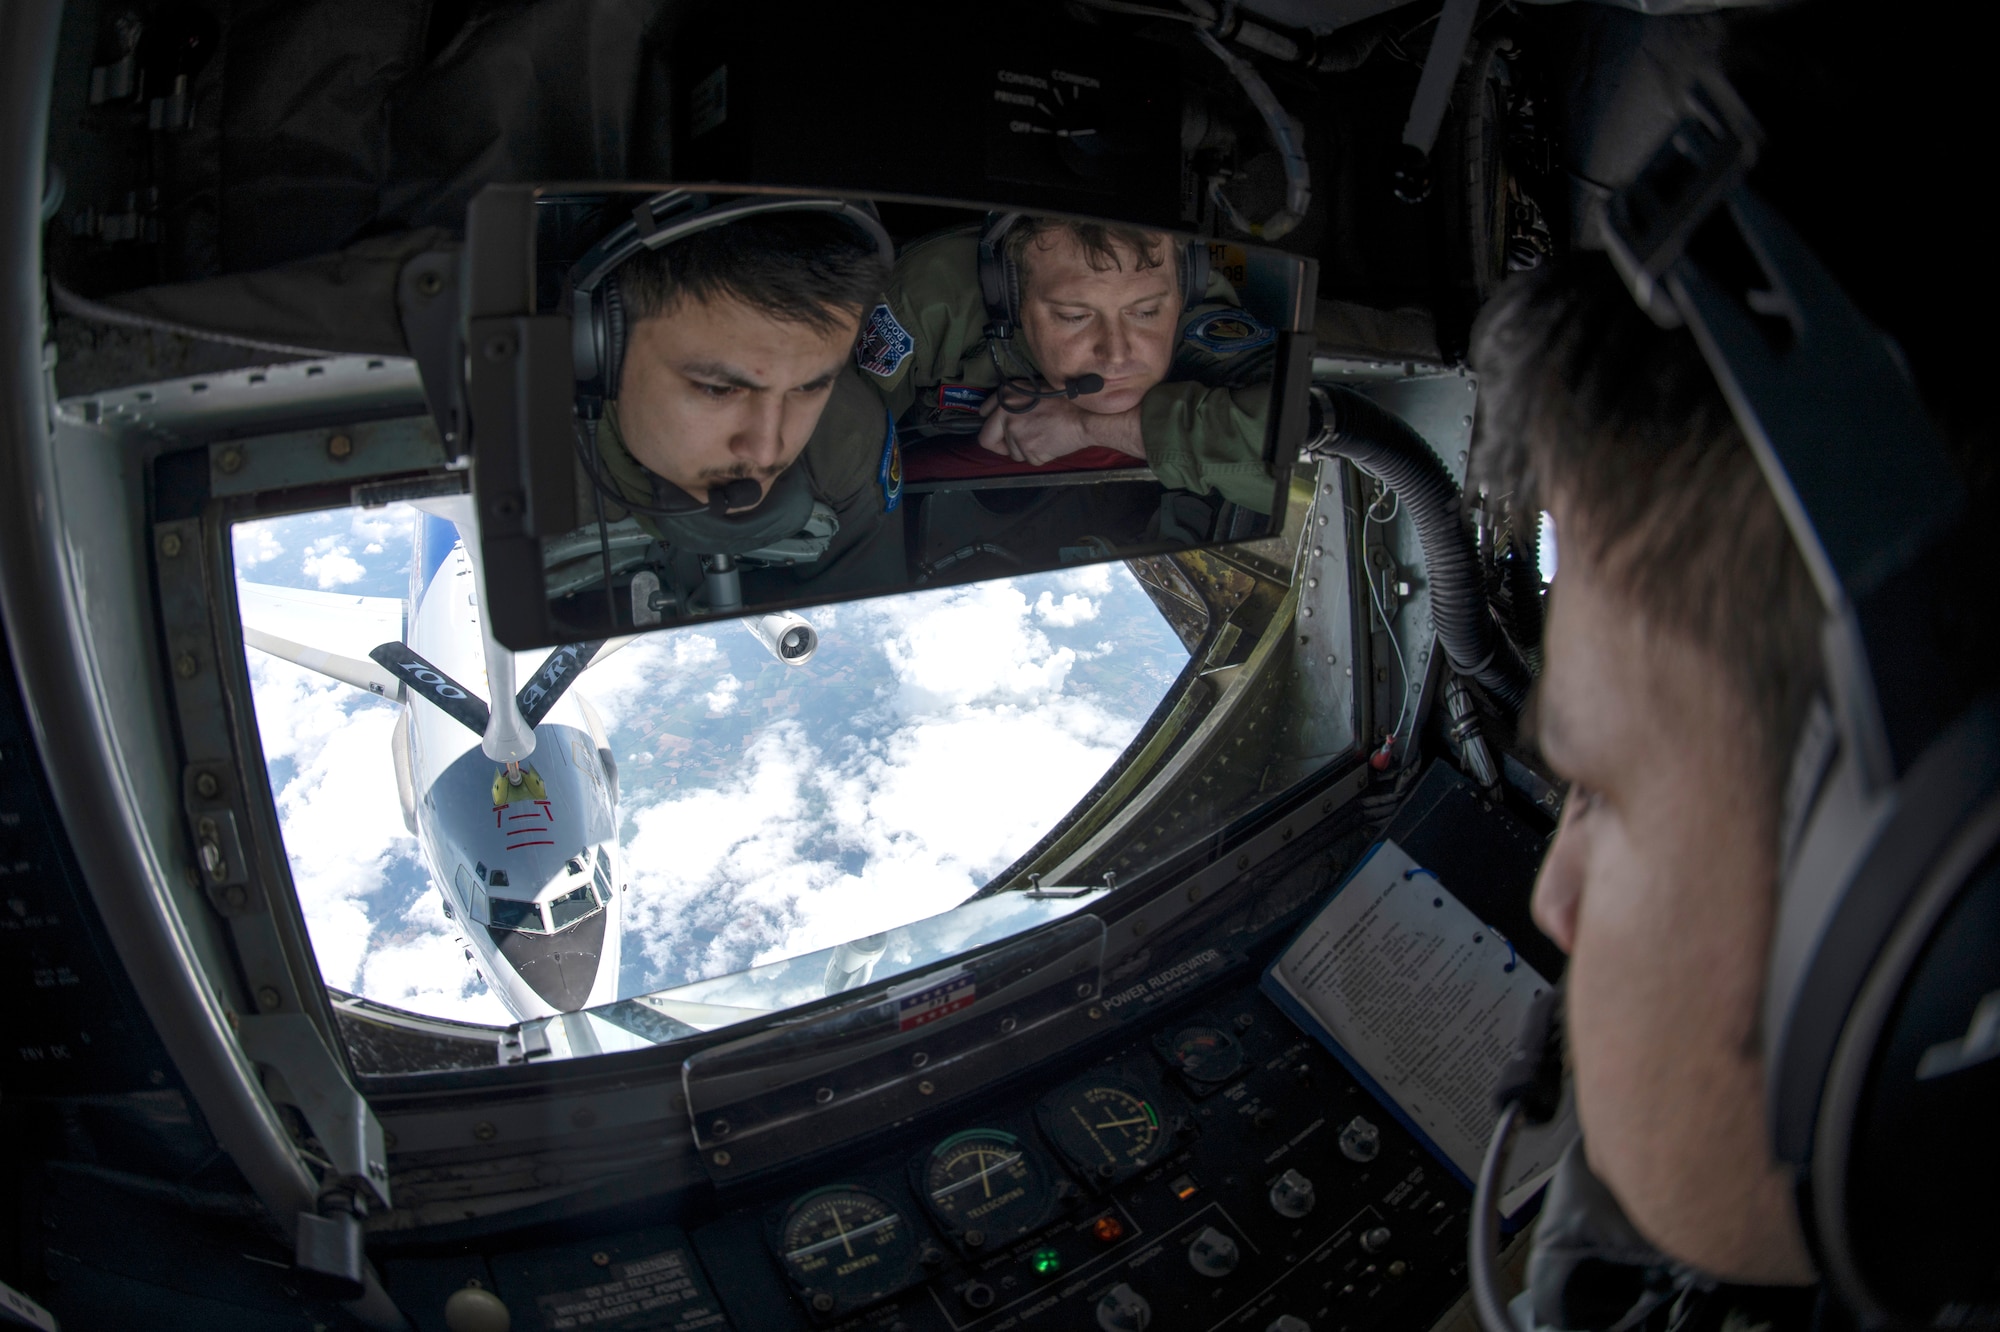 Airman 1st class David Liu, left, and Tech. Sgt. Brandon Roberts 351st Air Refueling Squadron boom operators, refuel a NATO E-3 Sentry from Geilenkirchen NATO Air Base over Germany, July 17, 2020. The 100th Air Refueling Wing is the only permanent U.S. air refueling wing in the European theater, providing the critical air refueling "bridge" which allows the Expeditionary Air Force to deploy around the globe at a moment's notice. (U.S. Air Force photo by Tech. Sgt. Emerson Nuñez)